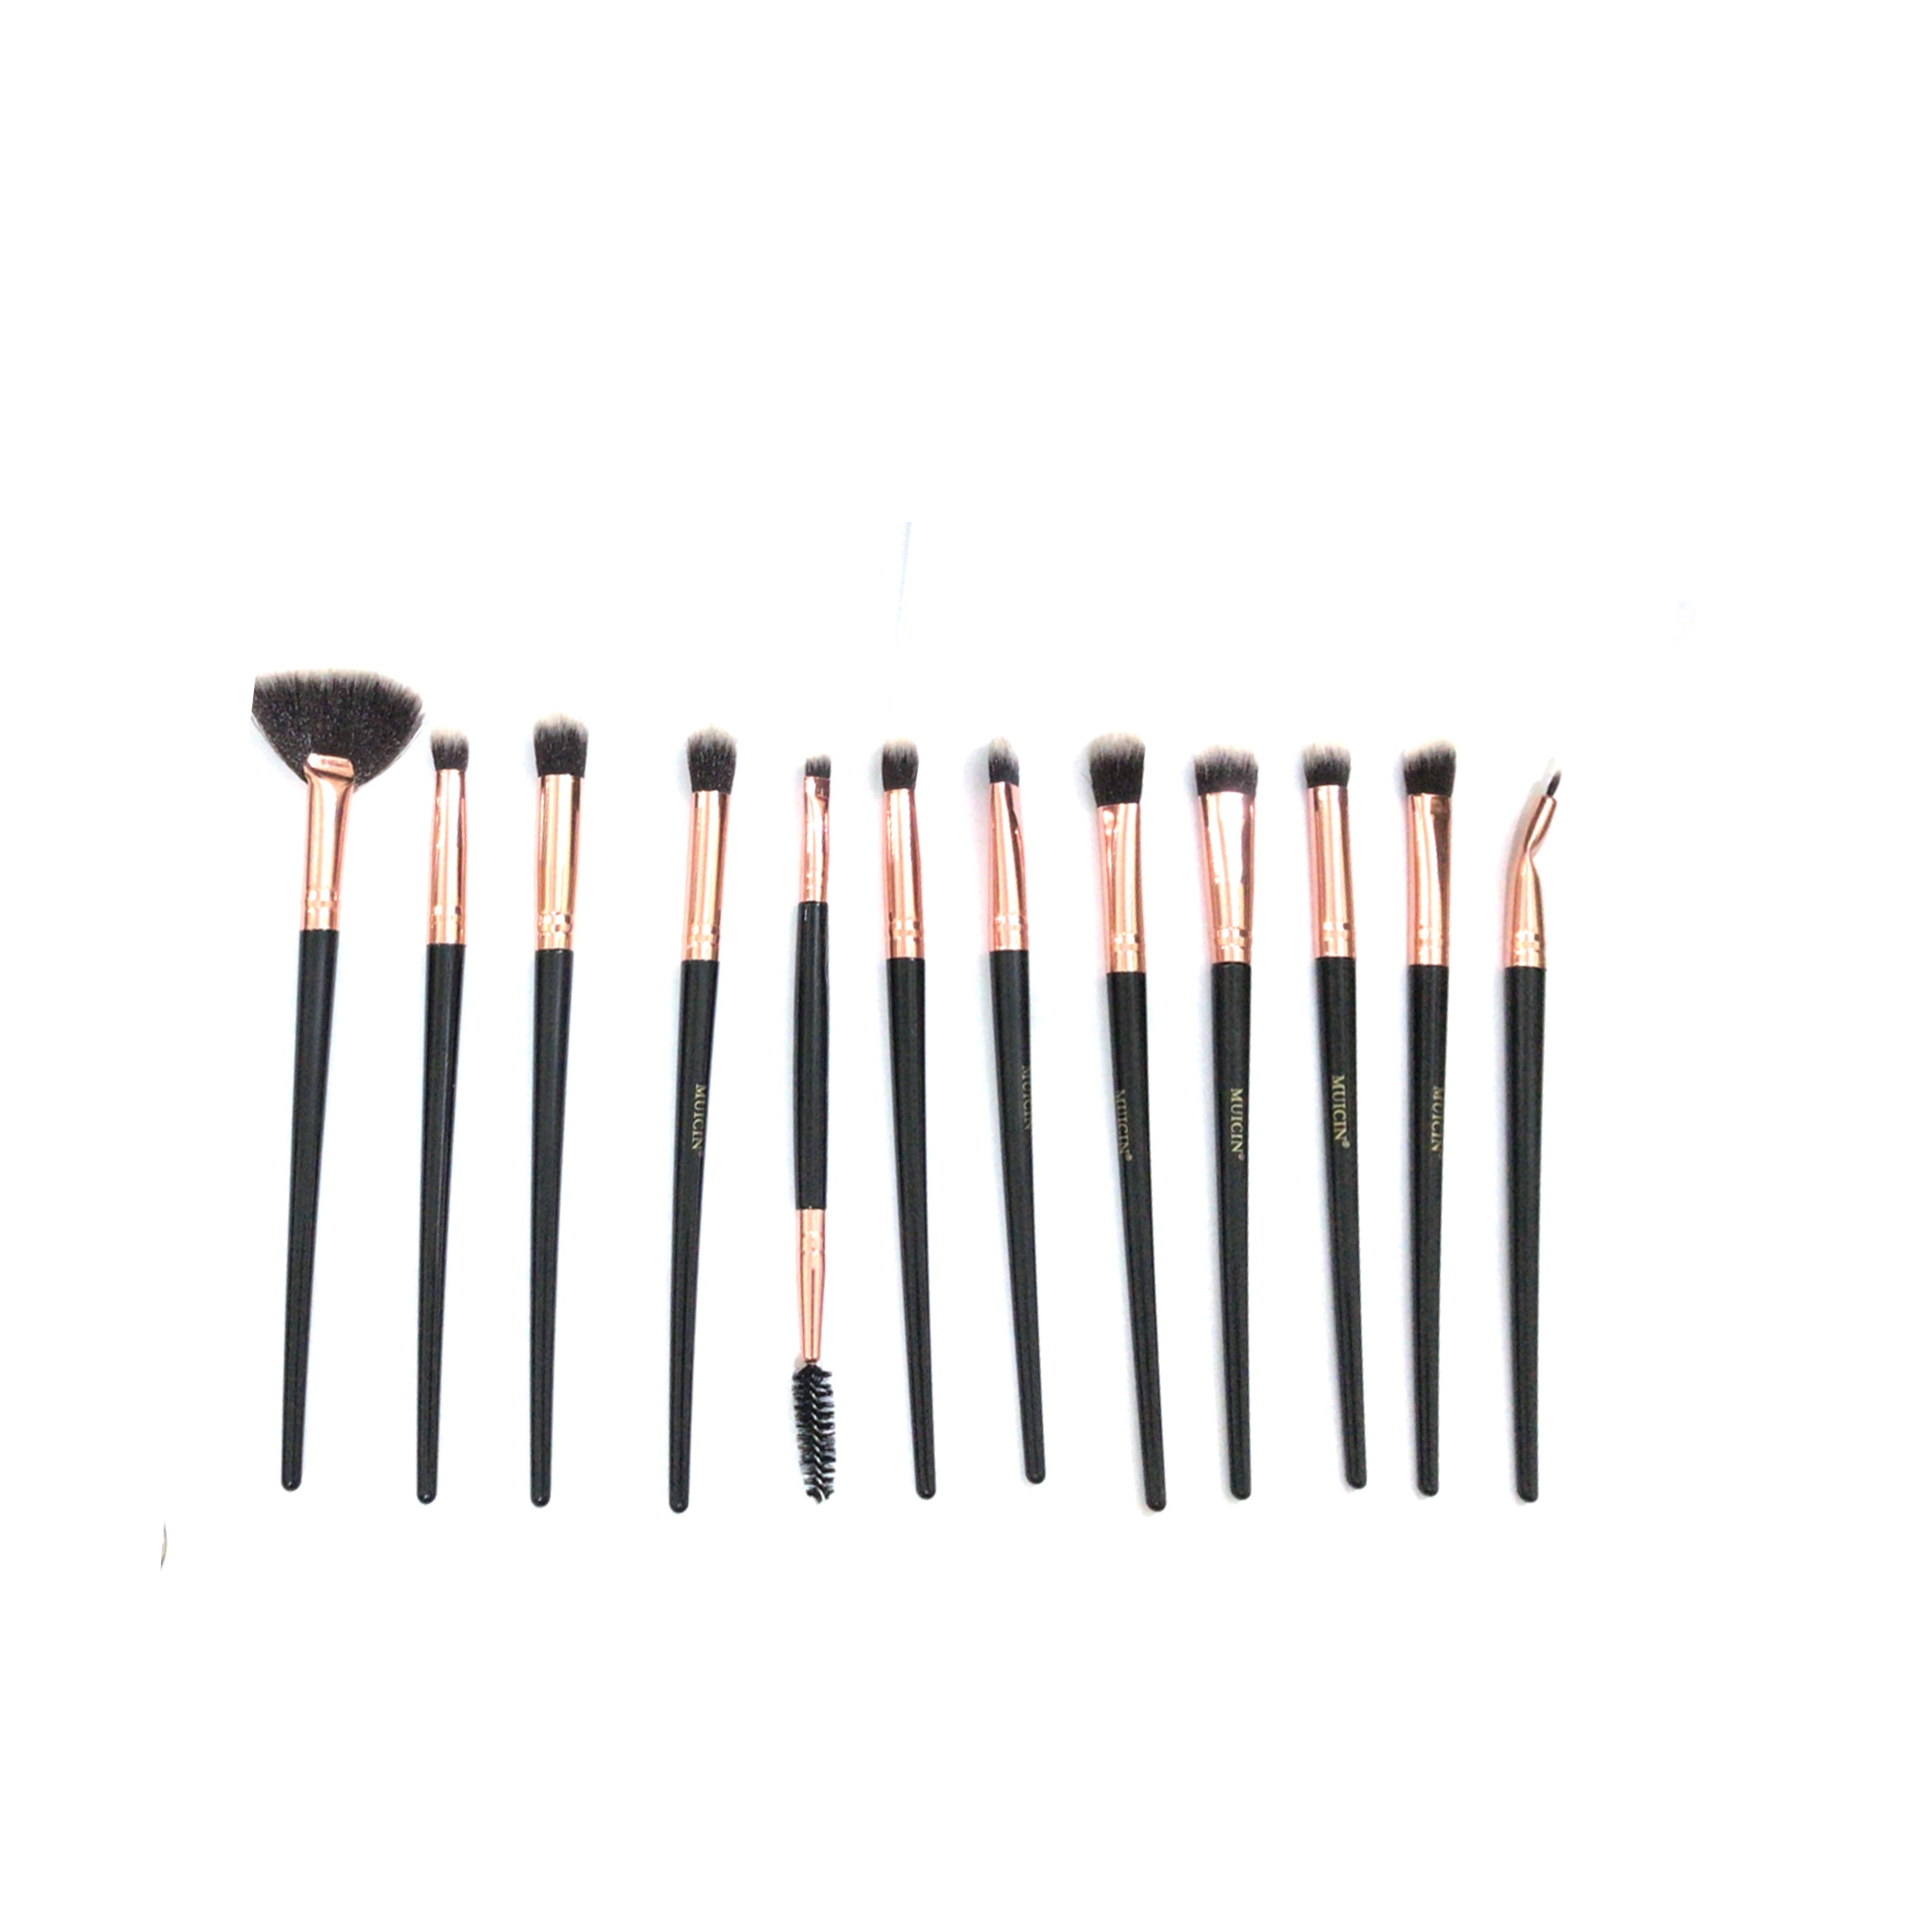 BLACK POUCH ROSE GOLD EYE BRUSH SET - 12 PIECES FOR SOPHISTICATED EYE MAKEUP